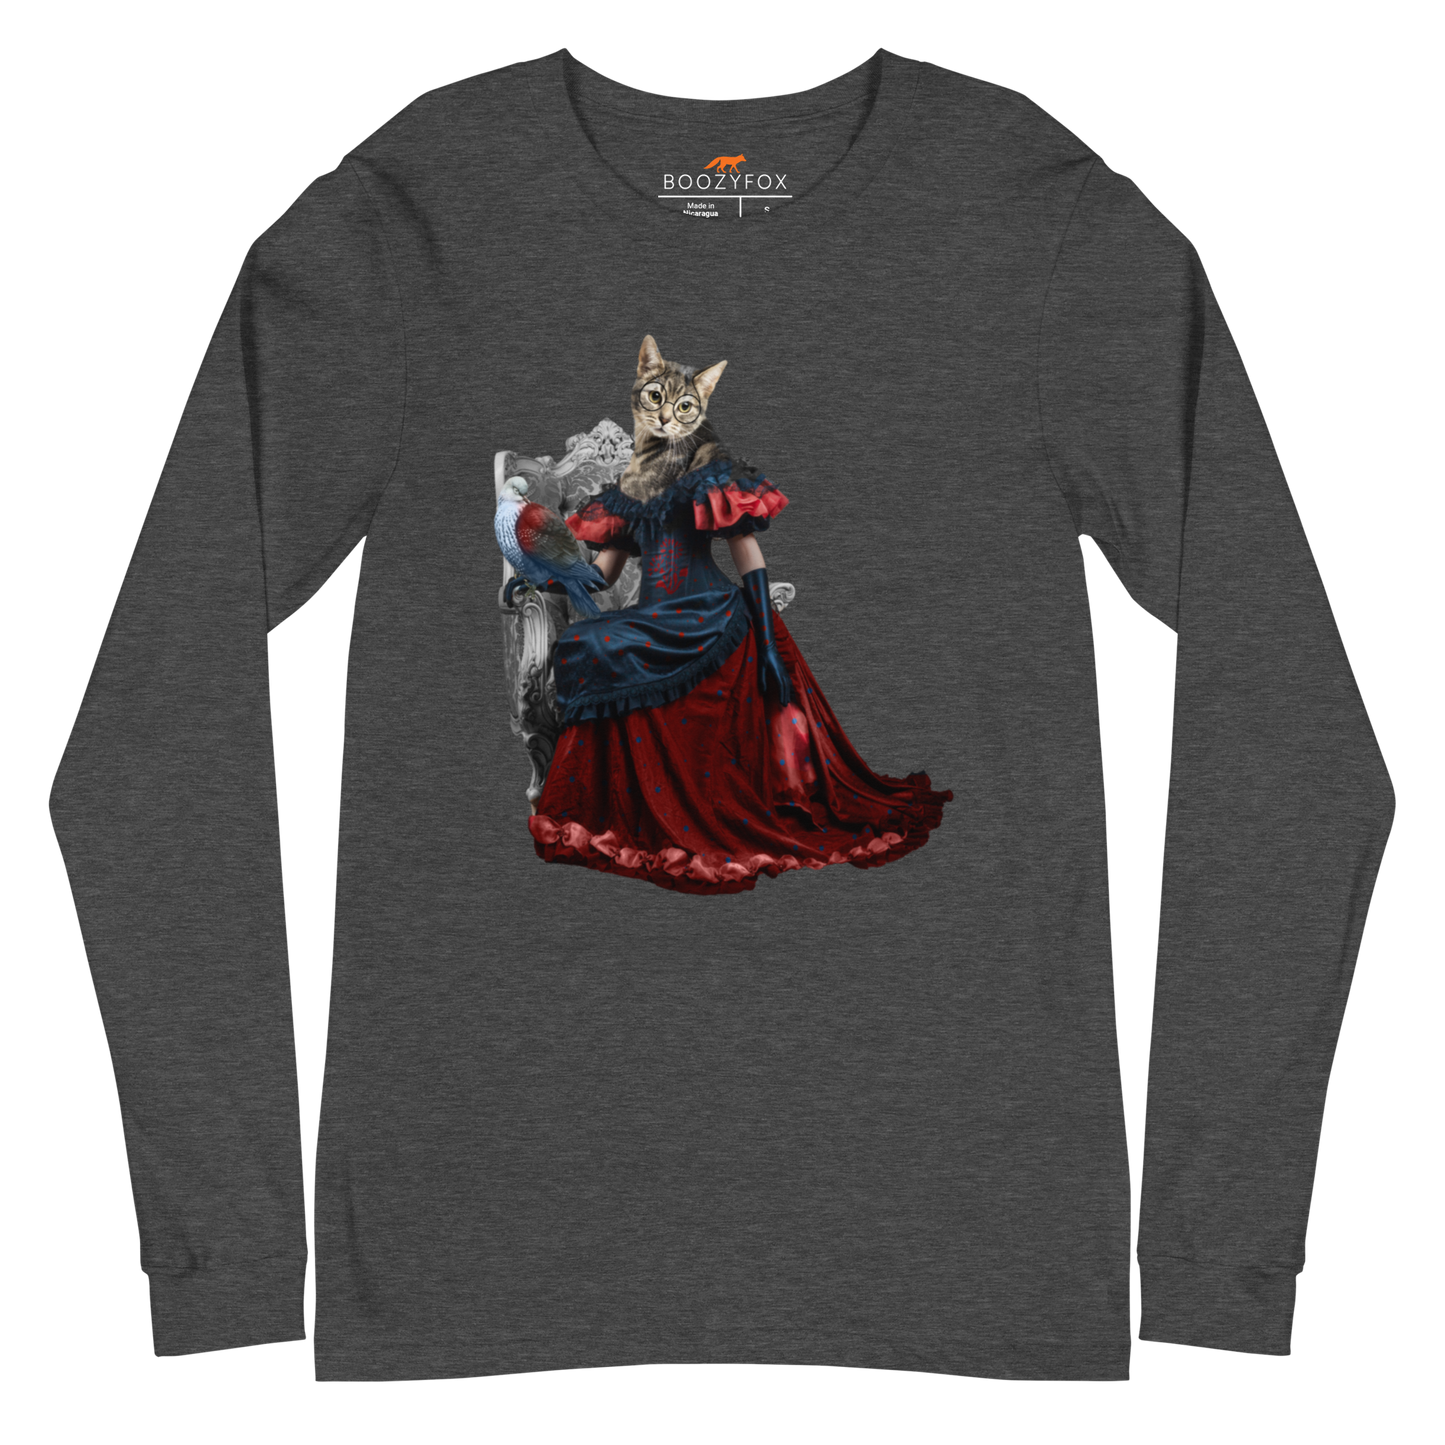 Dark Grey Heather Cat Long Sleeve Tee featuring an Anthropomorphic Cat graphic on the chest - Funny Cat Long Sleeve Graphic Tees - Boozy Fox